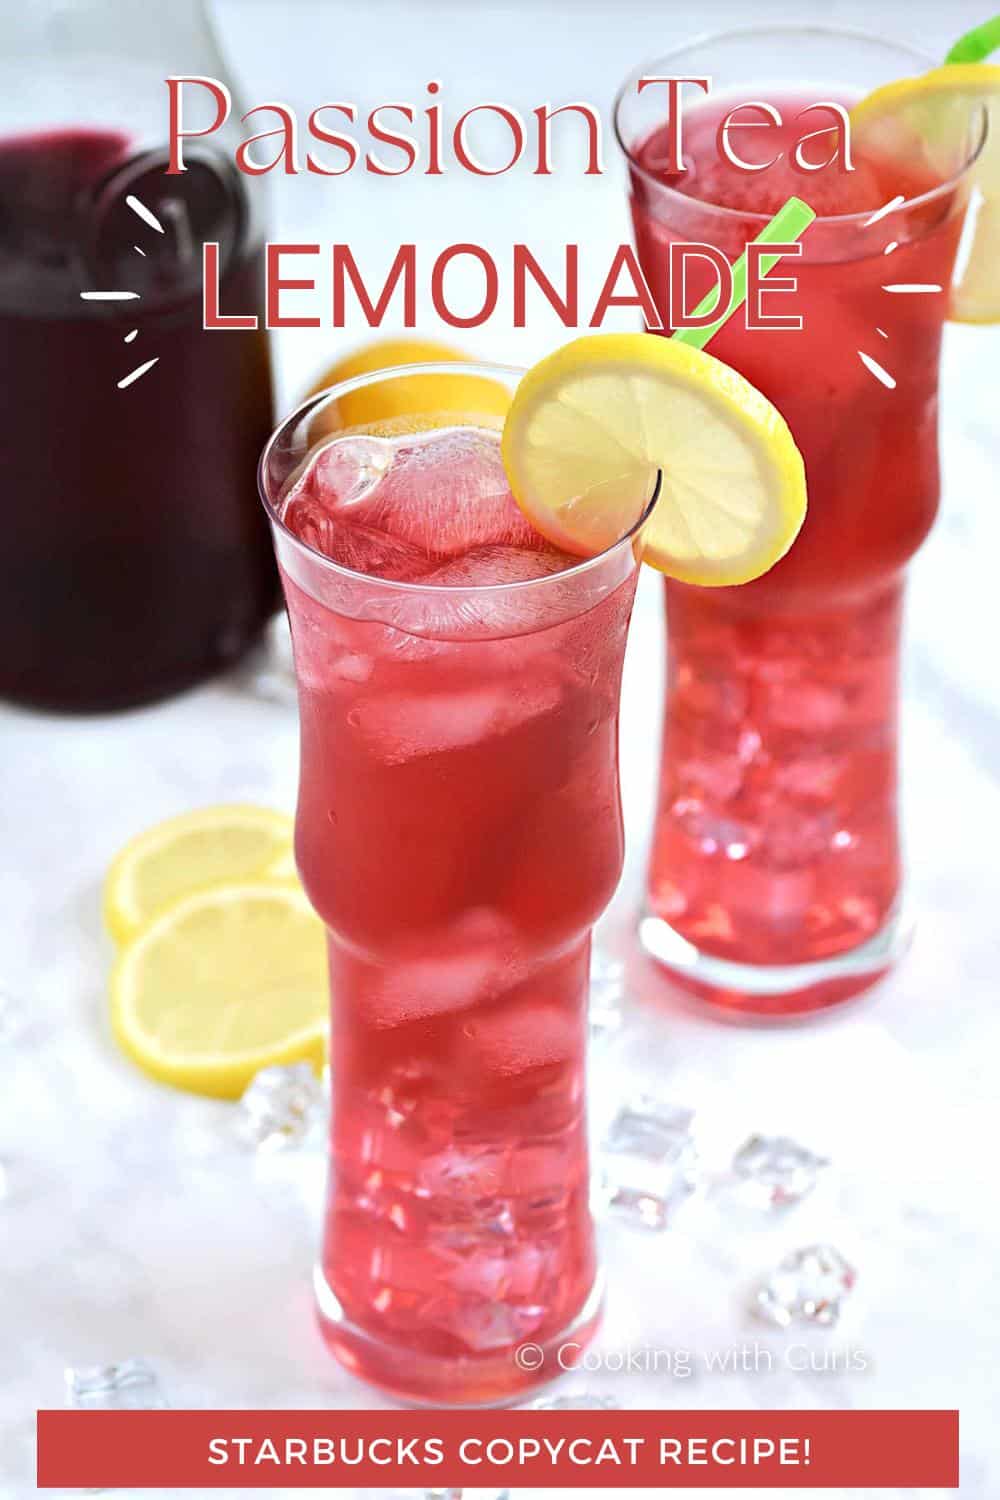 Two tall glasses filled with ice cubes and passion tea lemonade with a lemon slice garnish and title graphic across the top.